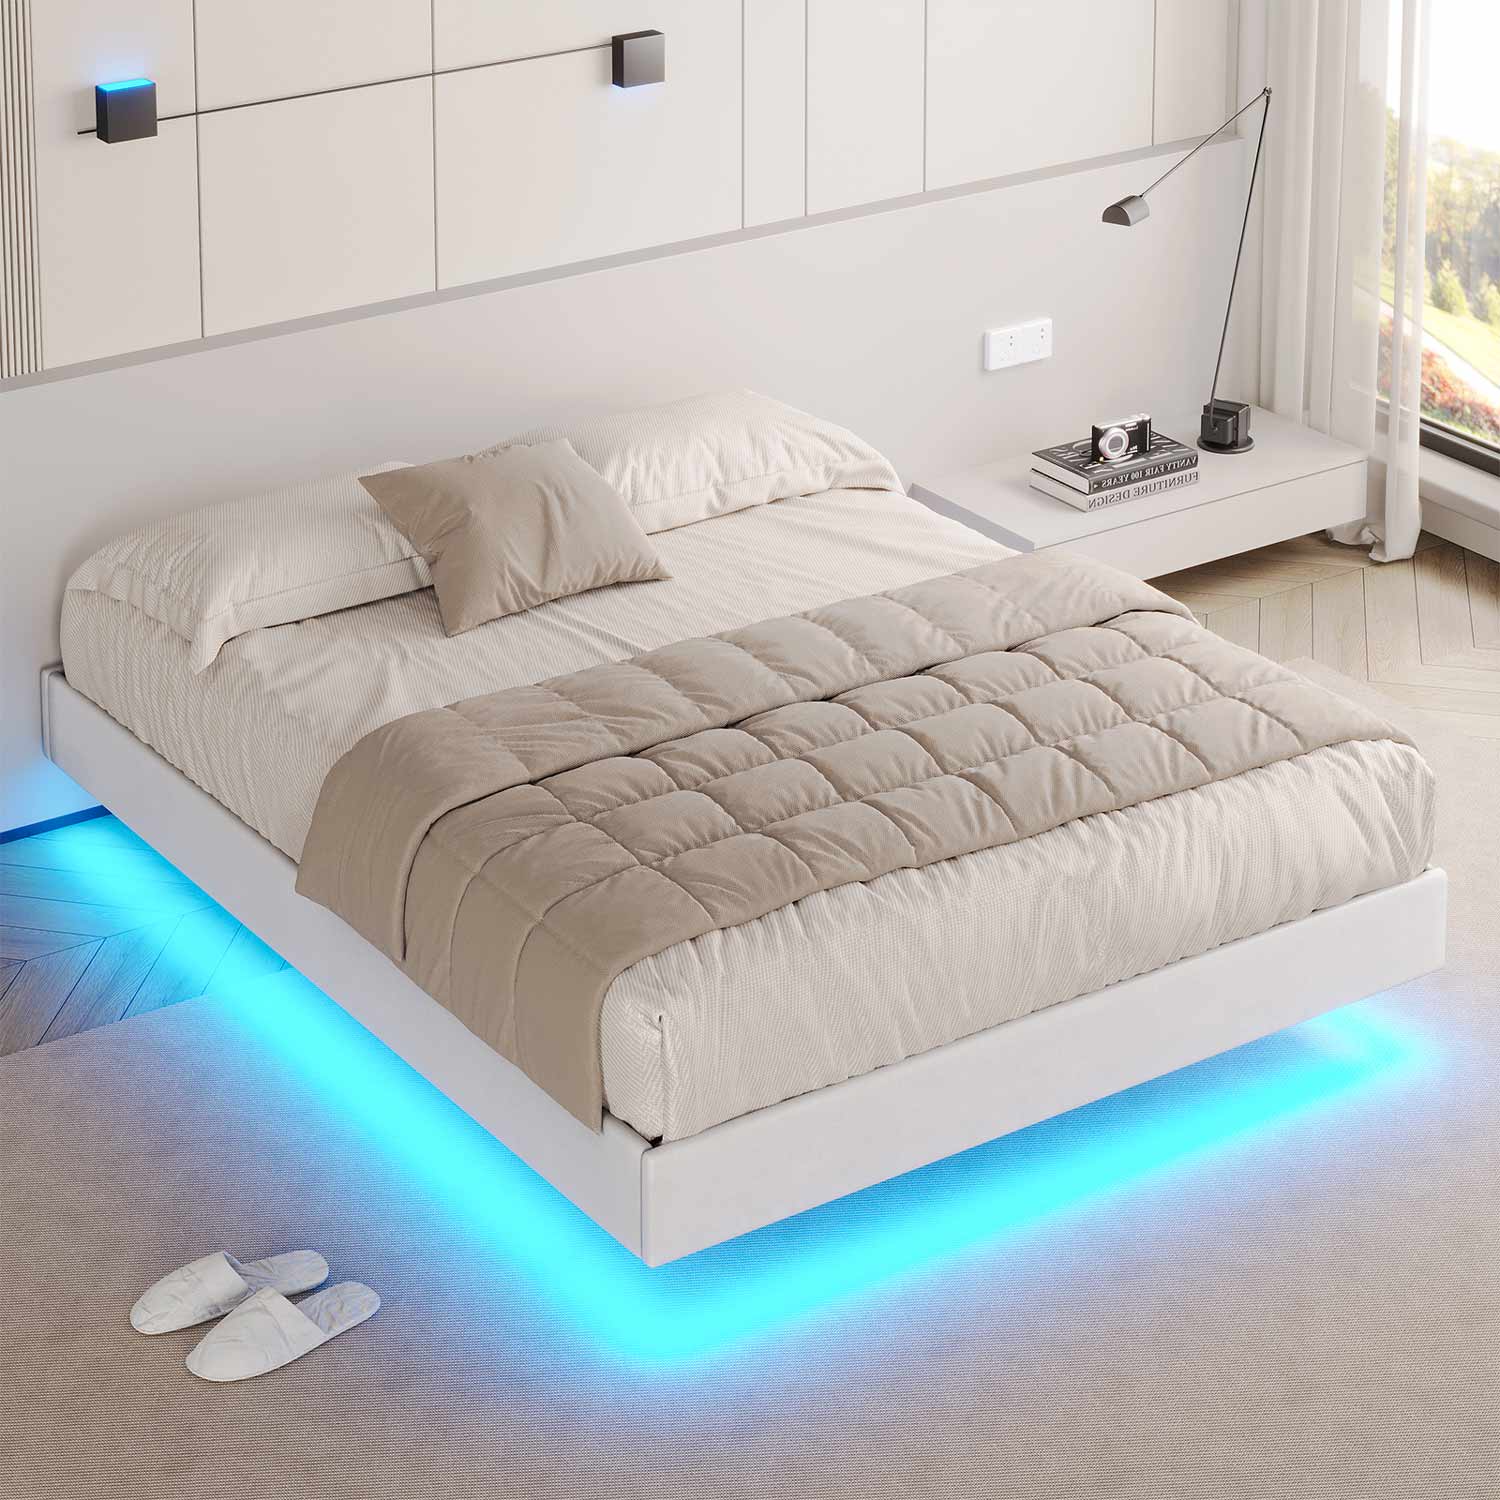 Queen Size Floating LED Upholstered Bed Frame with Low Profile